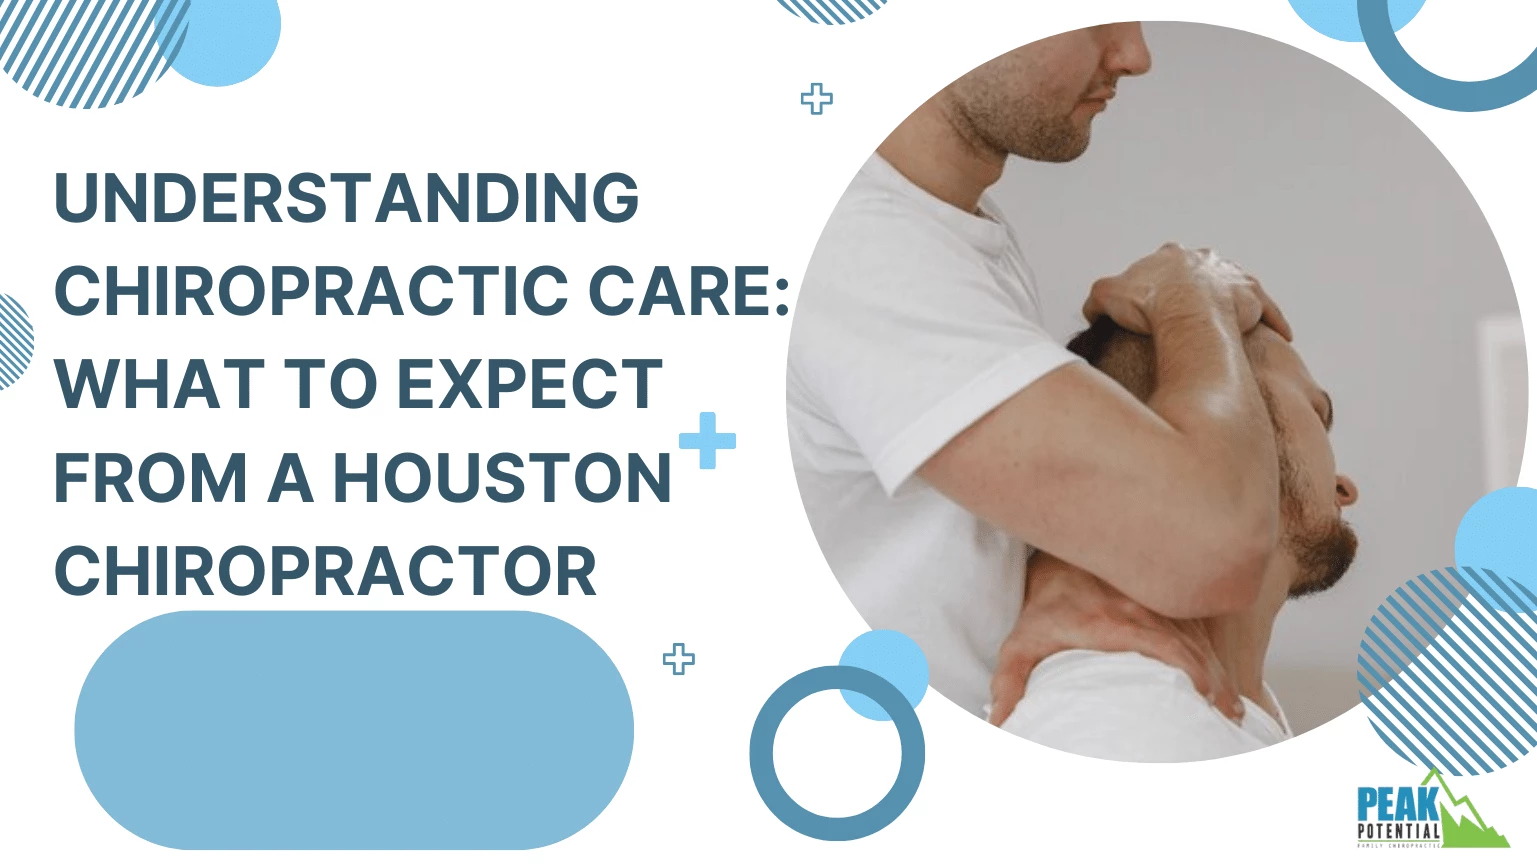 Understanding Chiropractic Care What to Expect from a Houston Chiropractor